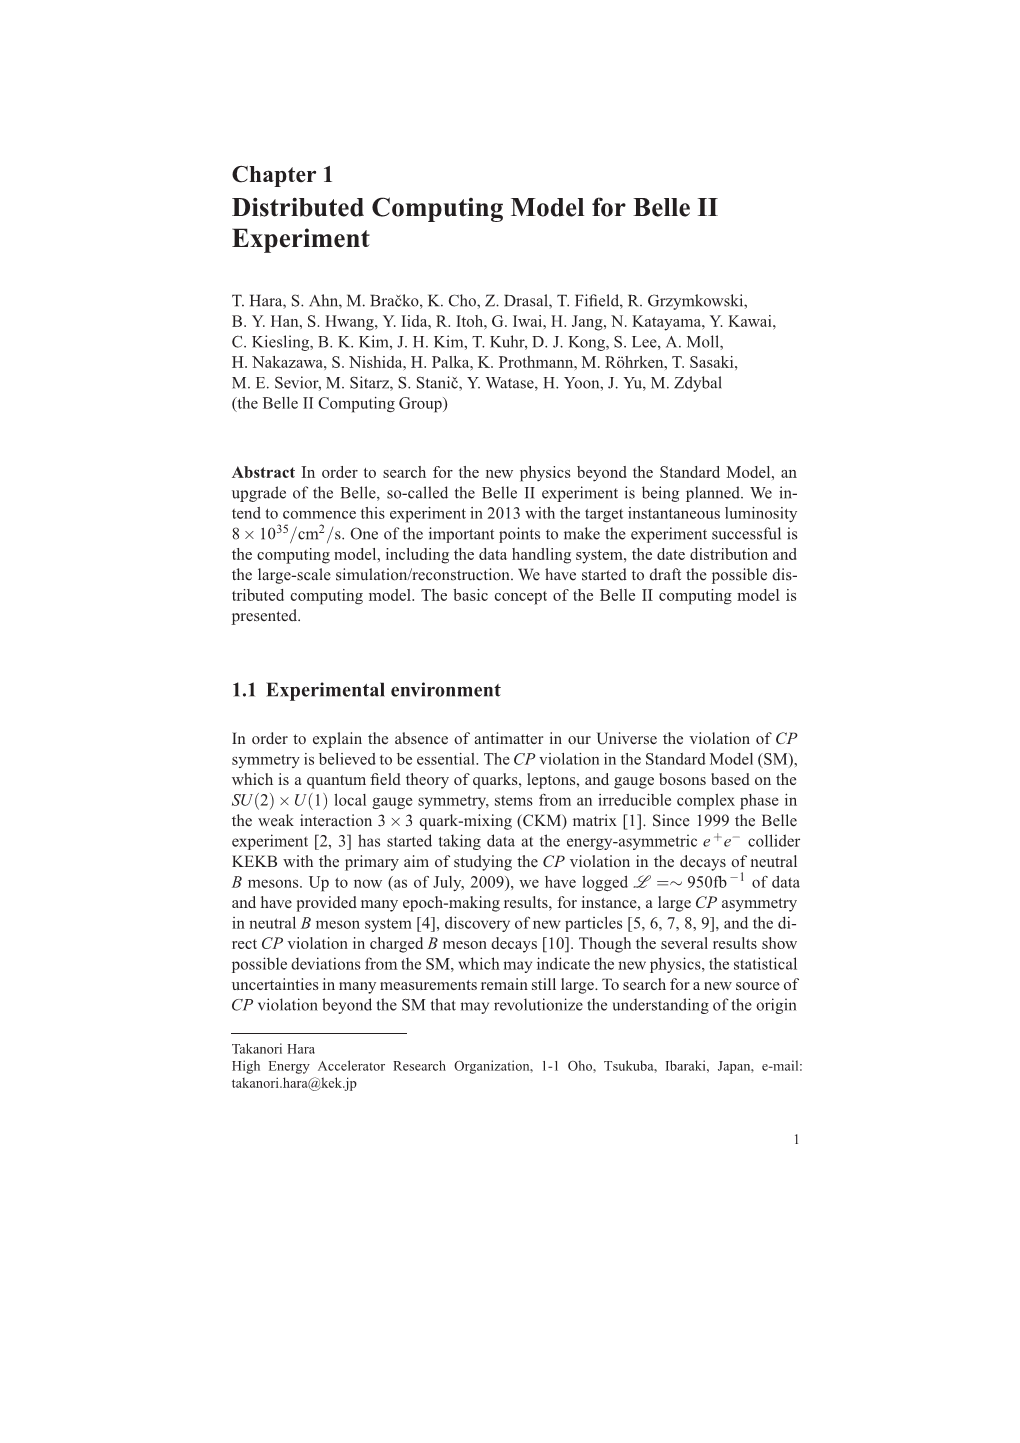 Chapter 1 Distributed Computing Model for Belle II Experiment